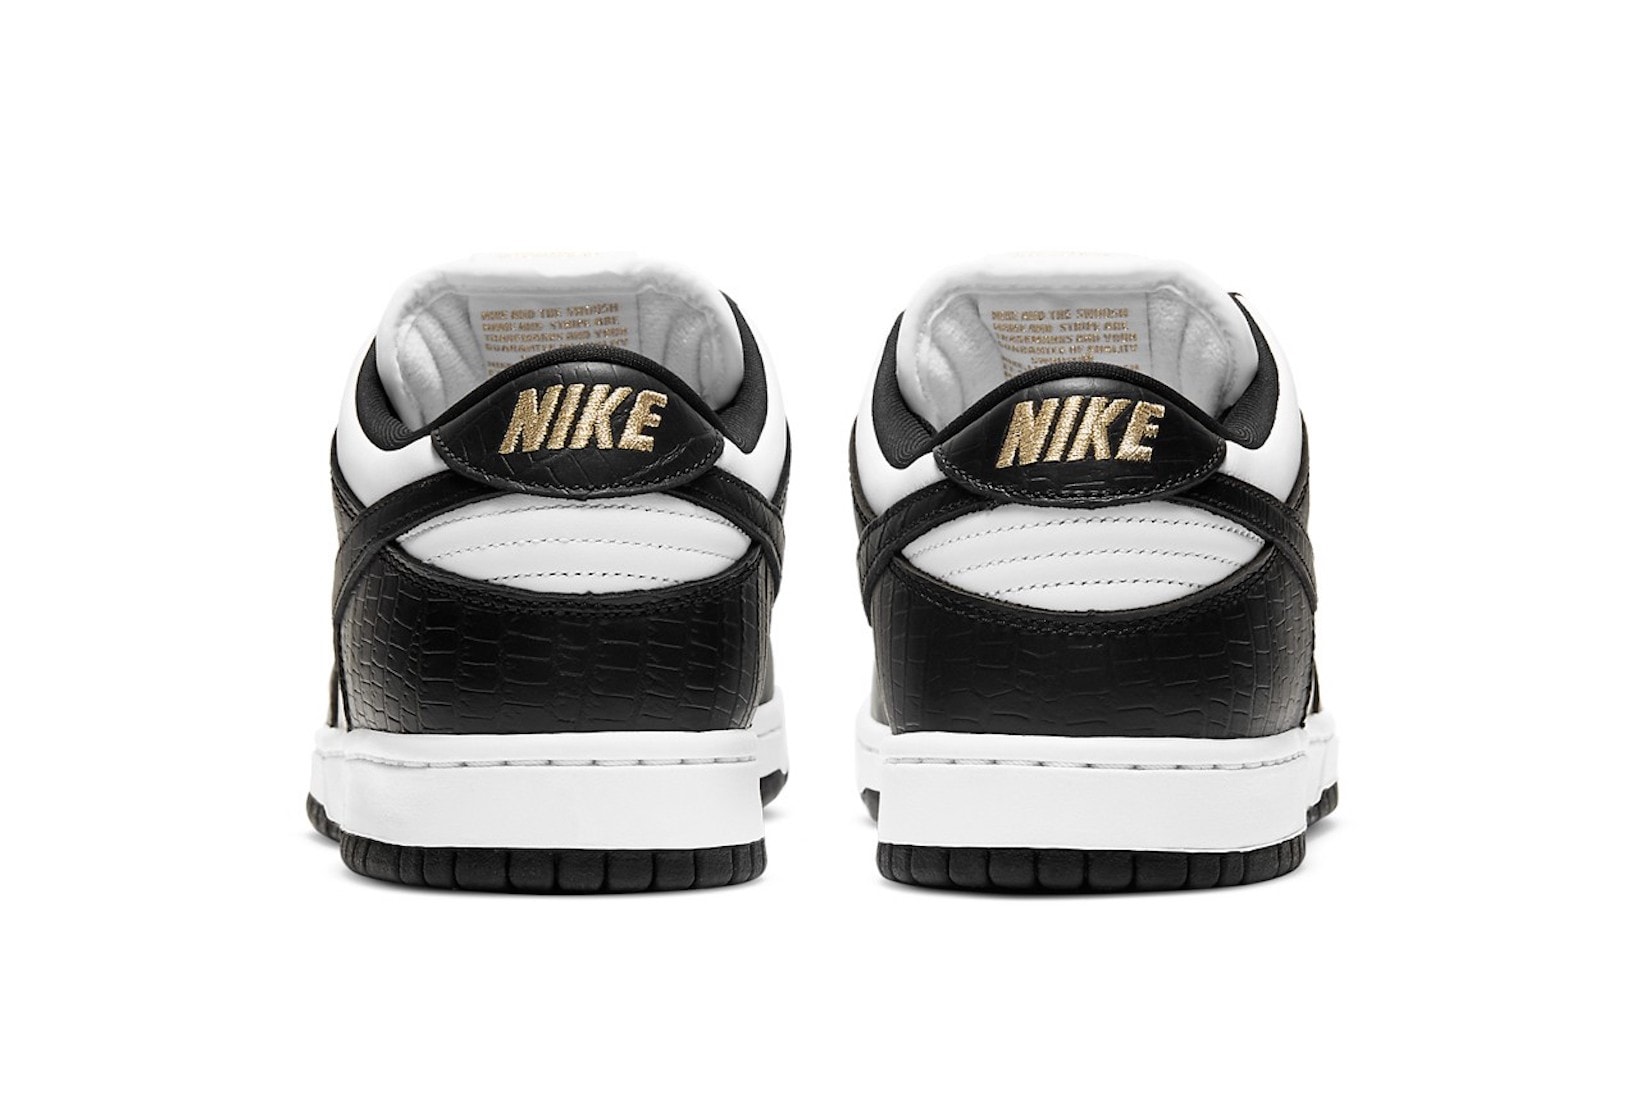 supreme nike sb dunk low collaboration sneakers black white colorway gold heel